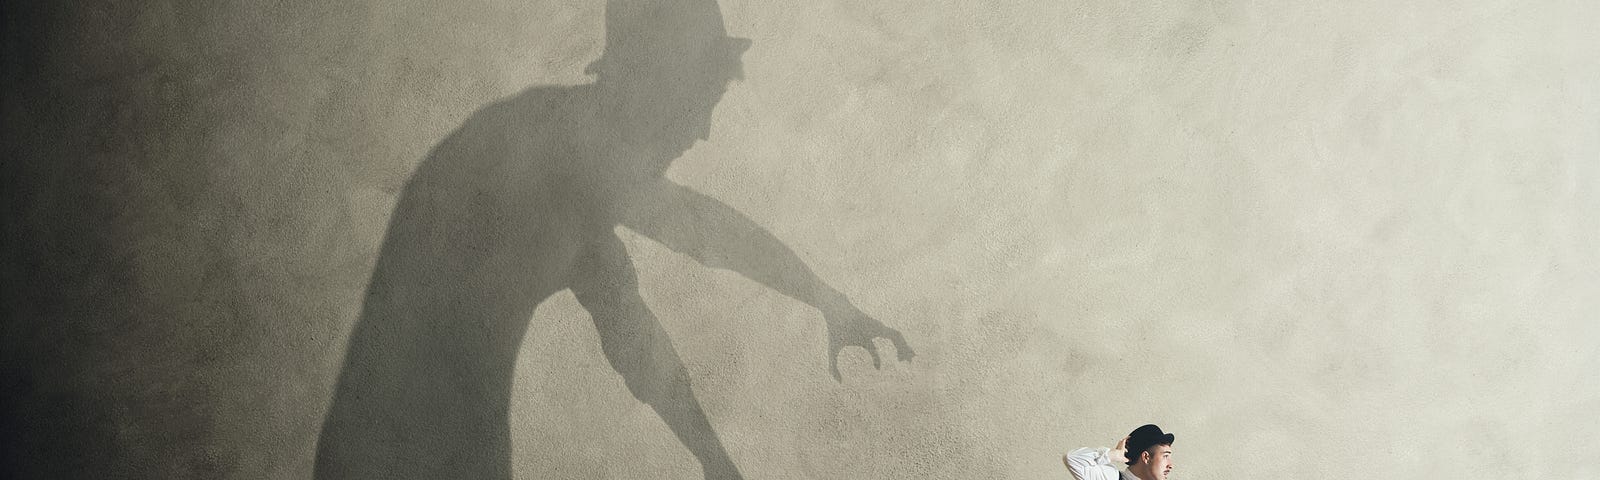 A man running away from his own shadow chasing him.